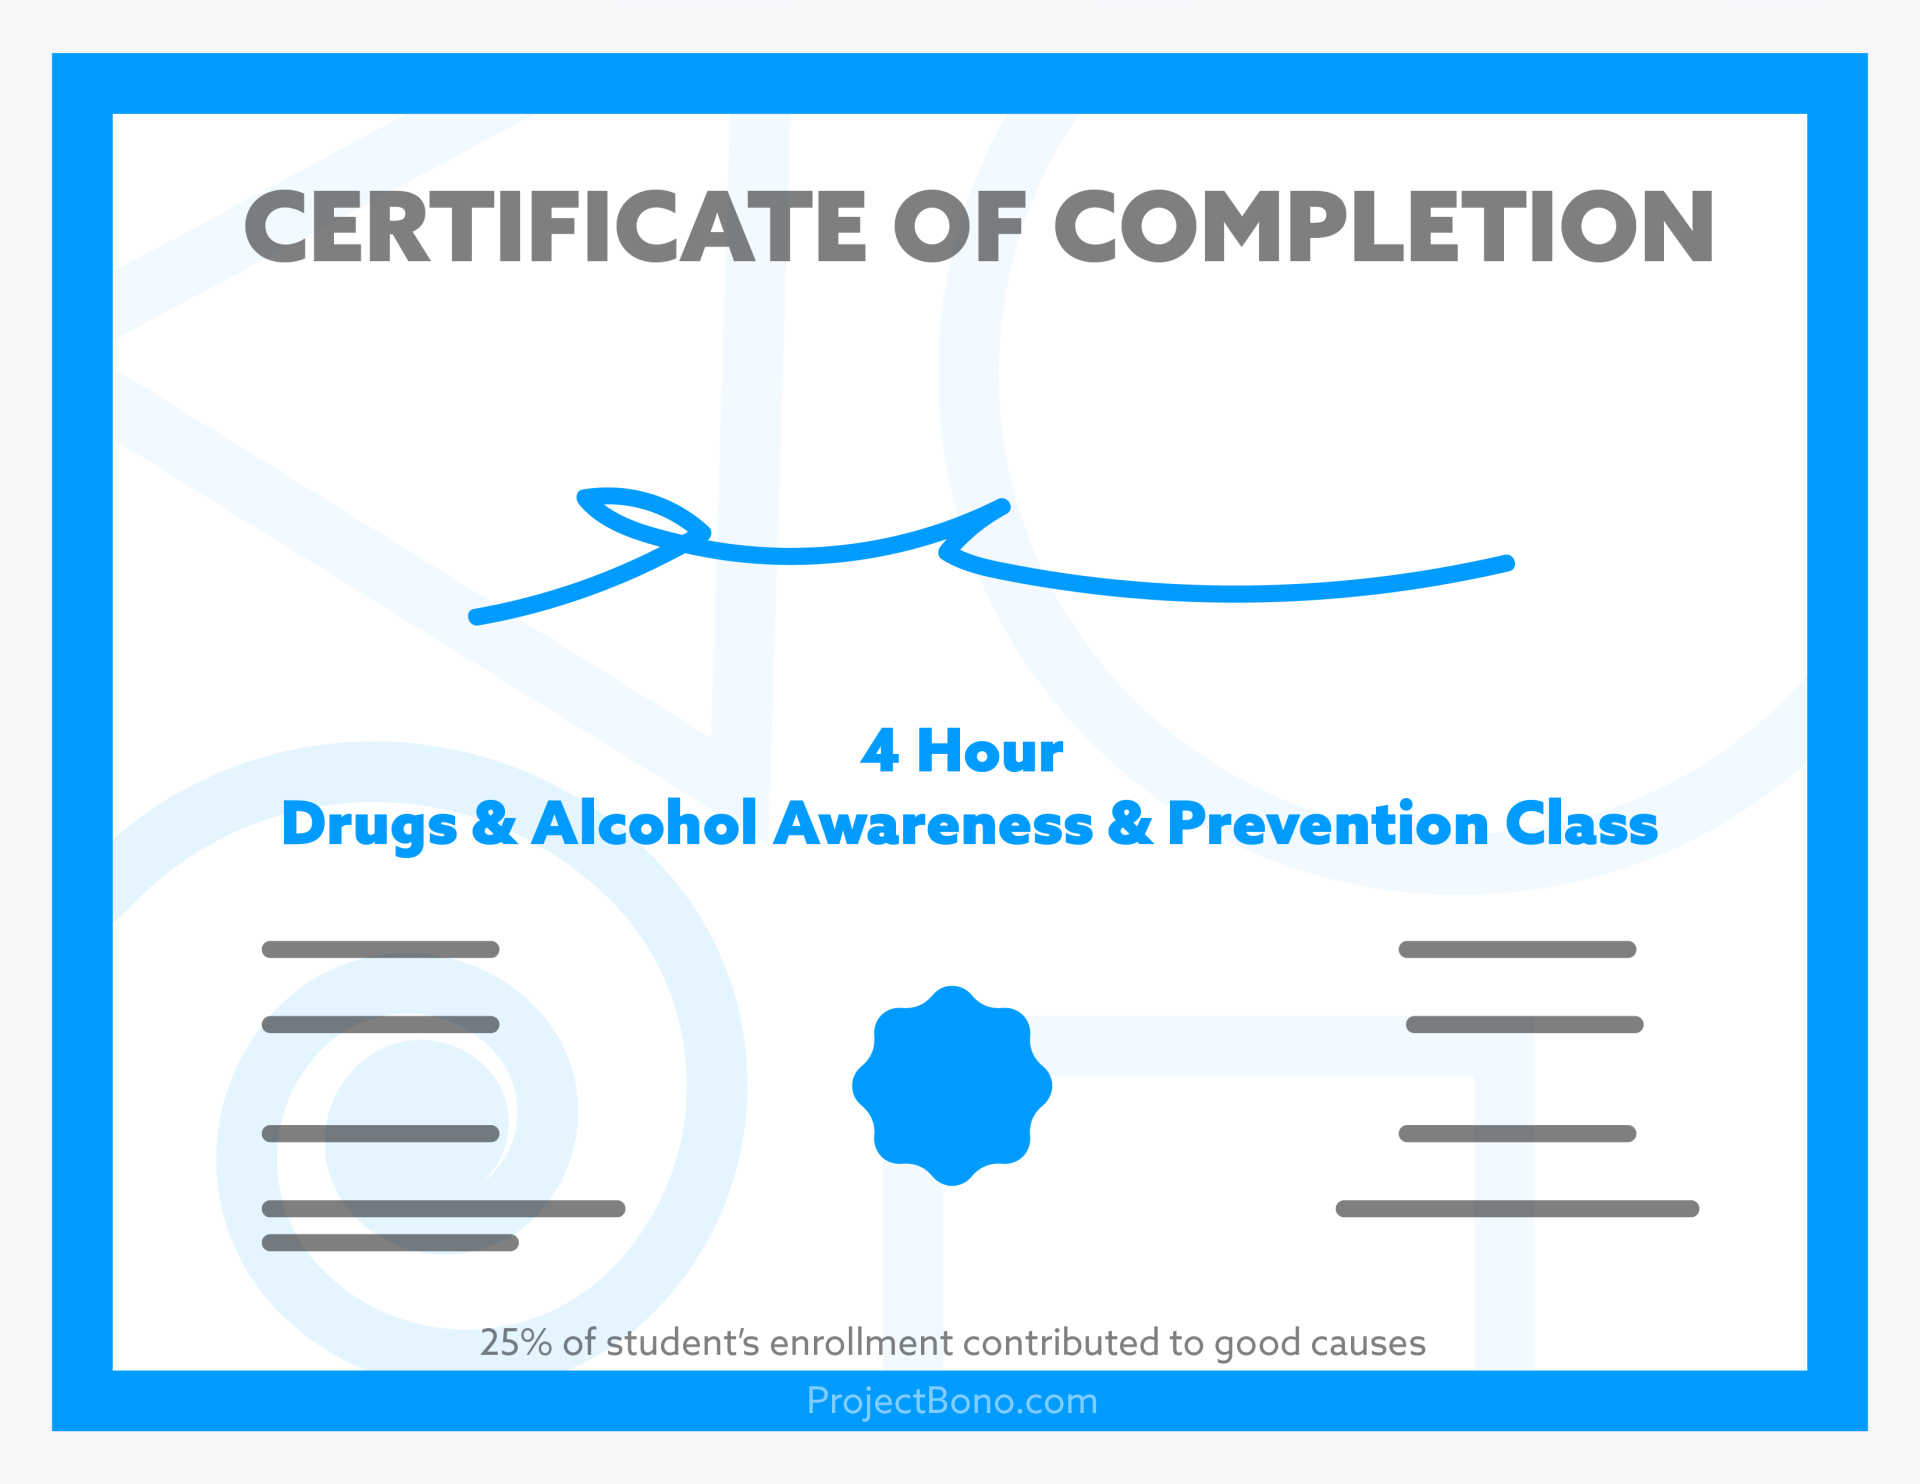 Drugs & Alcohol Drugs & Alcohol Awareness Awareness Class Course Online Probation Course for Course for Drugs Course for Alcohol Addiction Treatment Charity Acceptance Guarantee Certificate Education Youth Underage drinking Underage drinking class Underage drinking course Minor Minor in possession fake id false identification DUI OWI Cocaine Nicotine Marijuana Cannabis THC Certificate Of Completion 100% Online Elearning Crypto Cryptocurrency Bitcoin Ethereum Dogecoin Ticket online certificate programs online certificate course learning Drugs Alcohol pro Project Bono Project Bono Civil Misdemeanor Felony Offense Offender First First Offender drug court minor mip dui owi drunk driving drugs and alcohol course alcohol awareness class substance abuse substance abuse classes for probation anger management certificate Schools texas texas drug court texas drugs and alcohol class texas mip laws alabama alaska arizona Arkansas California colorado Connecticut Delaware Florida Georgia Hawaii Idaho illinois indiana iowa kansas kentucky Louisiana maine maryland massachusetts michigan minnesota Mississippi missouri montana nebraska nevada New Hampshire new jersey new mexico new york miami chicago North Carolina North Dakota Ohio Oklahoma Oregon Pennsylvania Rhode Island South Carolina South Dakota Tennessee Utah Vermont Virginia Washington West Virginia Wisconsin Wyoming Alcoholism drug prevention Enroll driving under the influence Affordable 2 hour 4 hour 6 hour 8 hour 12 hour 16 hour level 2 chemical dependency stimulant dea schedule i schedule ii schedule iii schedule iv schedule v possession controlled substance open container citation police judge court administrator instructor lawyer legal correcctional juvenile correctional education community enrichment community enrichment school acedemics attention domestic infraction civil infraction 18 21 under 21 drug class free drug class cheap drug class drug class certificate court approved drug classes drug and alcohol awareness course free free online drug education classes free alcohol awareness class online court ordered courses drugs and alcohol classes alcohol awareness class online court appointed alcohol classes drug and alcohol awareness course court ordered courses online alcohol awareness certificate alcohol awareness course online mip classes court ordered drug and alcohol classes court ordered substance abuse classes mip class course for drugs and alcohol marijuana 101 online course court ordered drug classes 6 hour alcohol awareness class online 8 hour alcohol awareness class court order court ordered classes online anger management completion certificate free online drug and alcohol course bono drugs drug and alcohol awareness class bono.com drugs and alcohol class court ordered classes drug classes for probation 8 hour alcohol class drug and alcohol awareness certificate anger management course certificate free court ordered substance abuse classes online drug and alcohol awareness course online alcohol awareness class online free mip court online alcohol awareness class free drug classes anger management courses for court drug and alcohol classes for court drugs awareness course alcohol awareness classes online drug and alcohol courses drug awareness certificate drug awareness class mip course drug awareness course alcohol awareness course drug and alcohol awareness class online court ordered education program alcohol awareness class online texas texas drug and alcohol awareness class probation drug classes marijuana 101 class for court court ordered substance abuse classes online online drug classes for court free court ordered classes substance abuse classes for court online drug and alcohol classes for court printable anger management certificate of completion online substance abuse classes for court certificate of authenticity for project court approved substance abuse classes drug certificate alcohol and drug awareness program certificate florida dui class texas dui class 4 hour drug and alcohol course 8 hour drug and alcohol course 12 hour drug and alcohol course marijuana awareness class printable drug rehab completion certificate court ordered classes online mississippi north american learning institute drug and alcohol awareness training texas state approved alcohol awareness class online anger management classes court approved approved court approved bono dob court mandated course court ordered alcohol classes tempe az court ordered alcohol classes tempe arizona court ordered alcohol classes arizona 4 hours alcohol drug class anger management classes prices dui classes prices drug alcohol class prices how much does drug and alcohol class cost how long is alcohol awareness class drugs alcohol class miami dade miami-dade miami drug alcohol class online alcohol and drugs courses rehab probation support probation officer approved bono anger management 